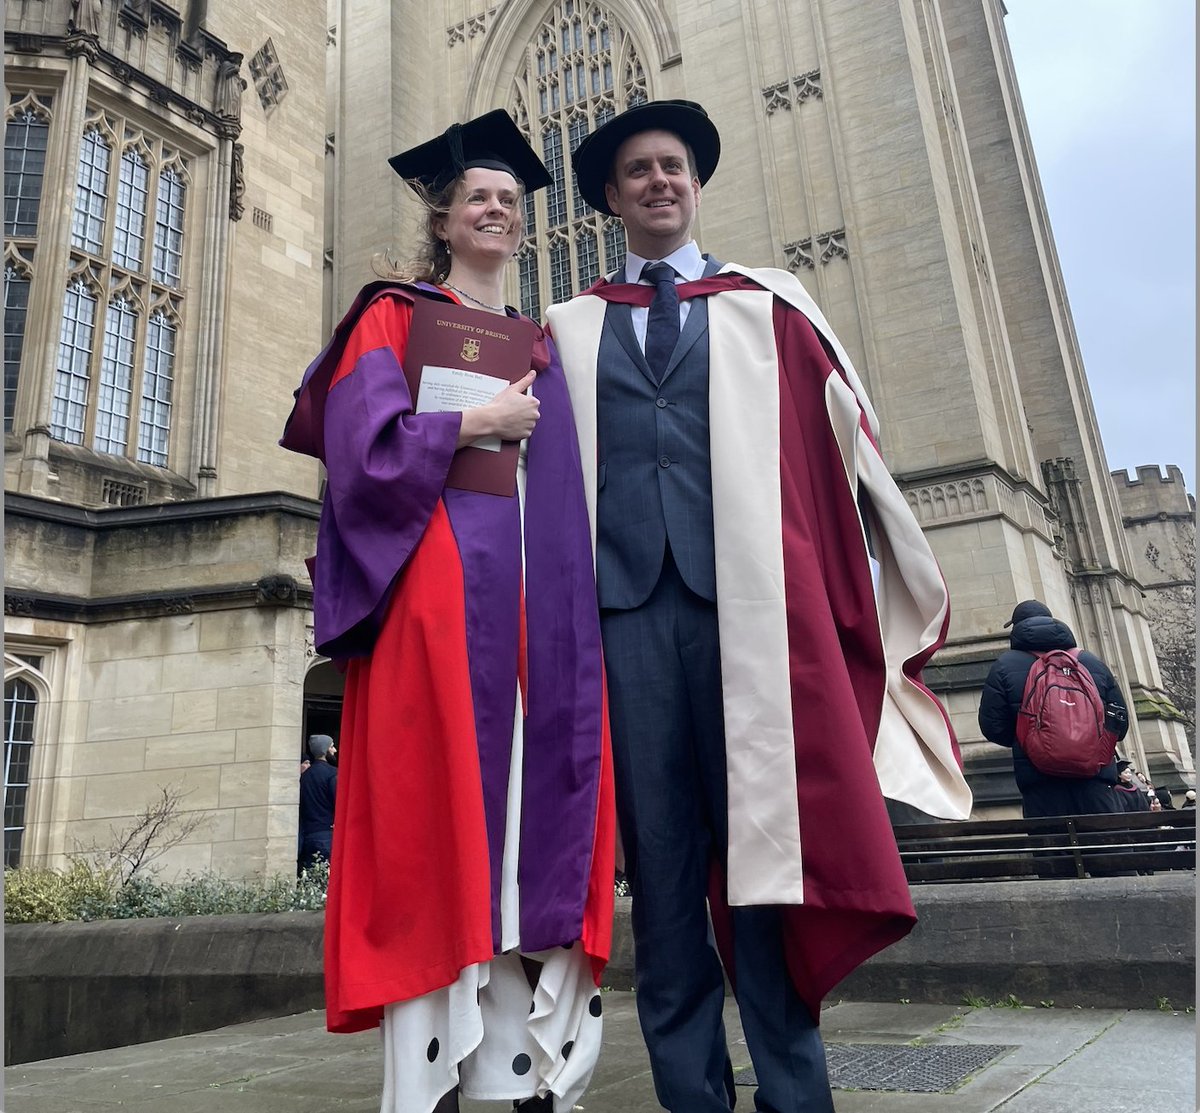 Excited to formally award a PhD to @EmilyRBall - such an outstanding thesis on atmospheric circulation on Mars. We thought we'd dress in red to be more at one with the red planet. My gown accurately depicts the polar layer deposits 😀